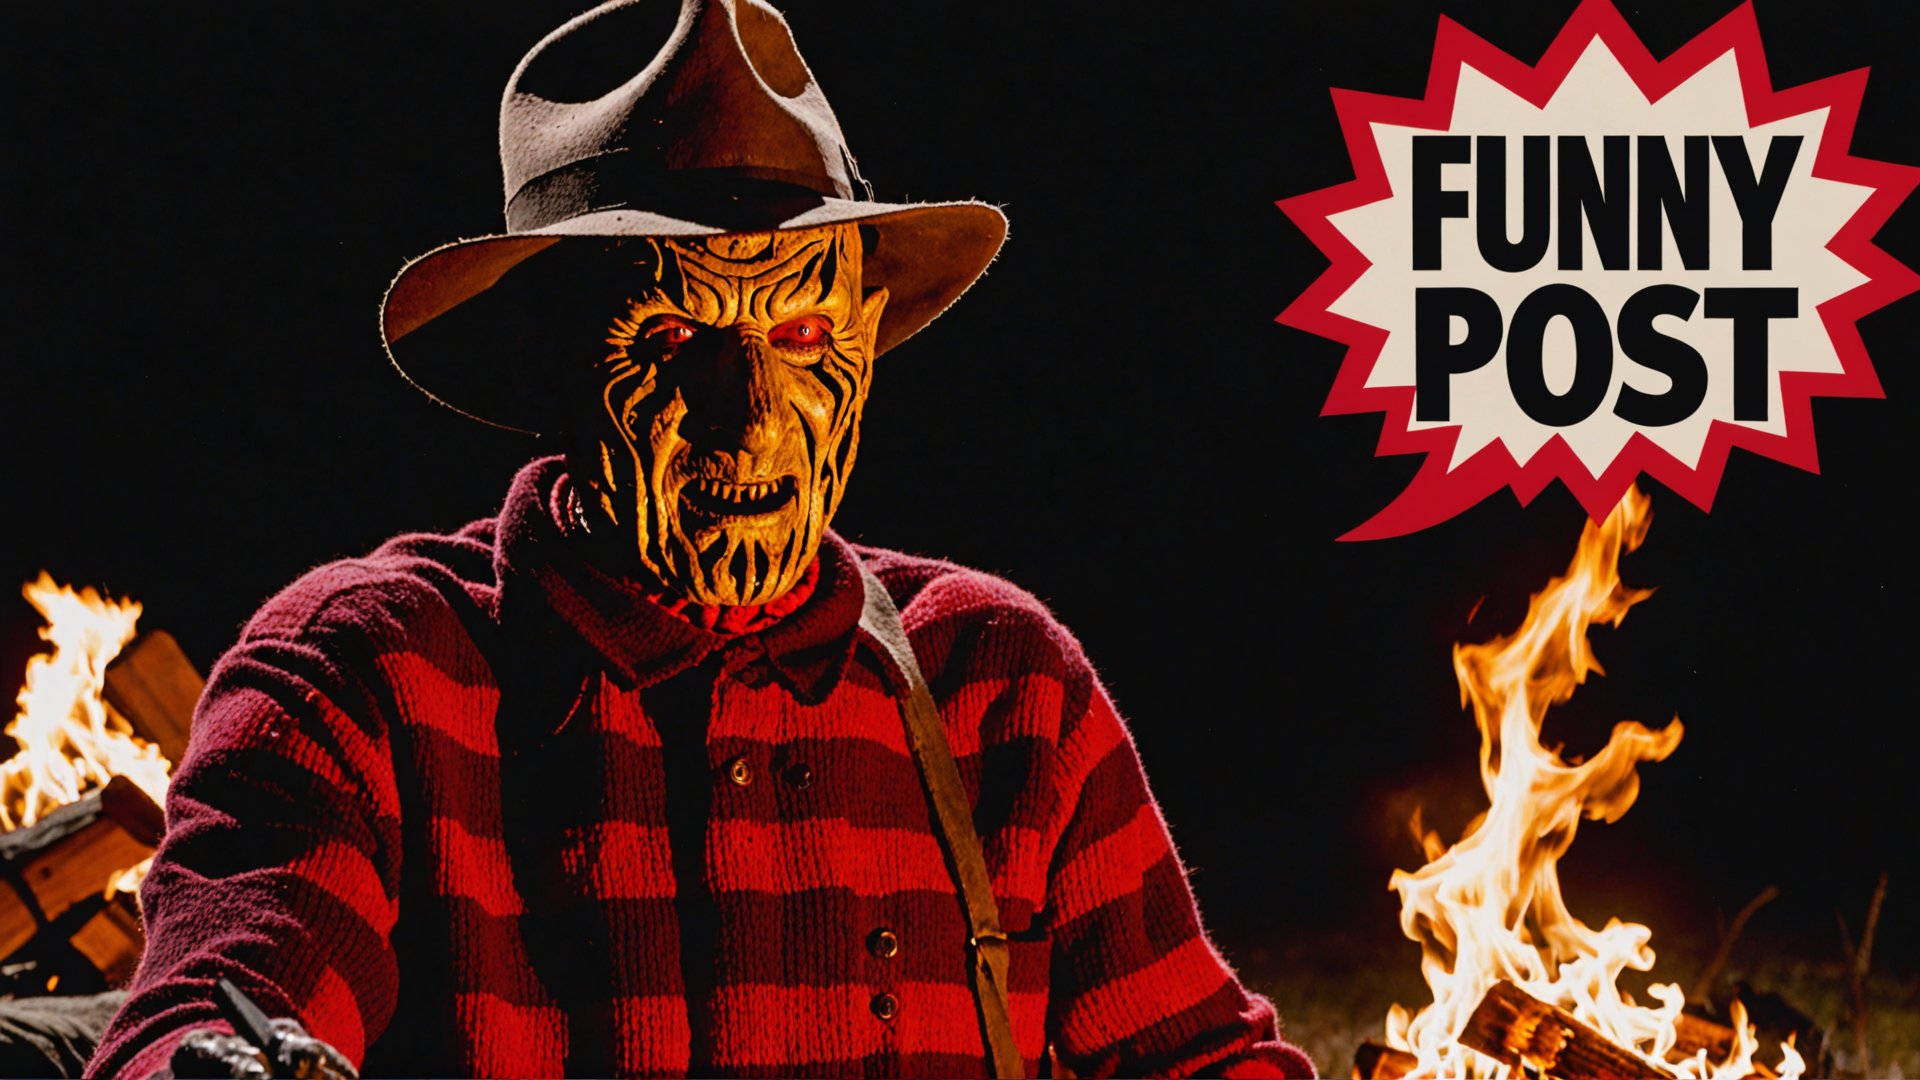 Black and white and red Photo of Freddy Krueger on fire burning in campfire at night with text bubble that says "funny post"